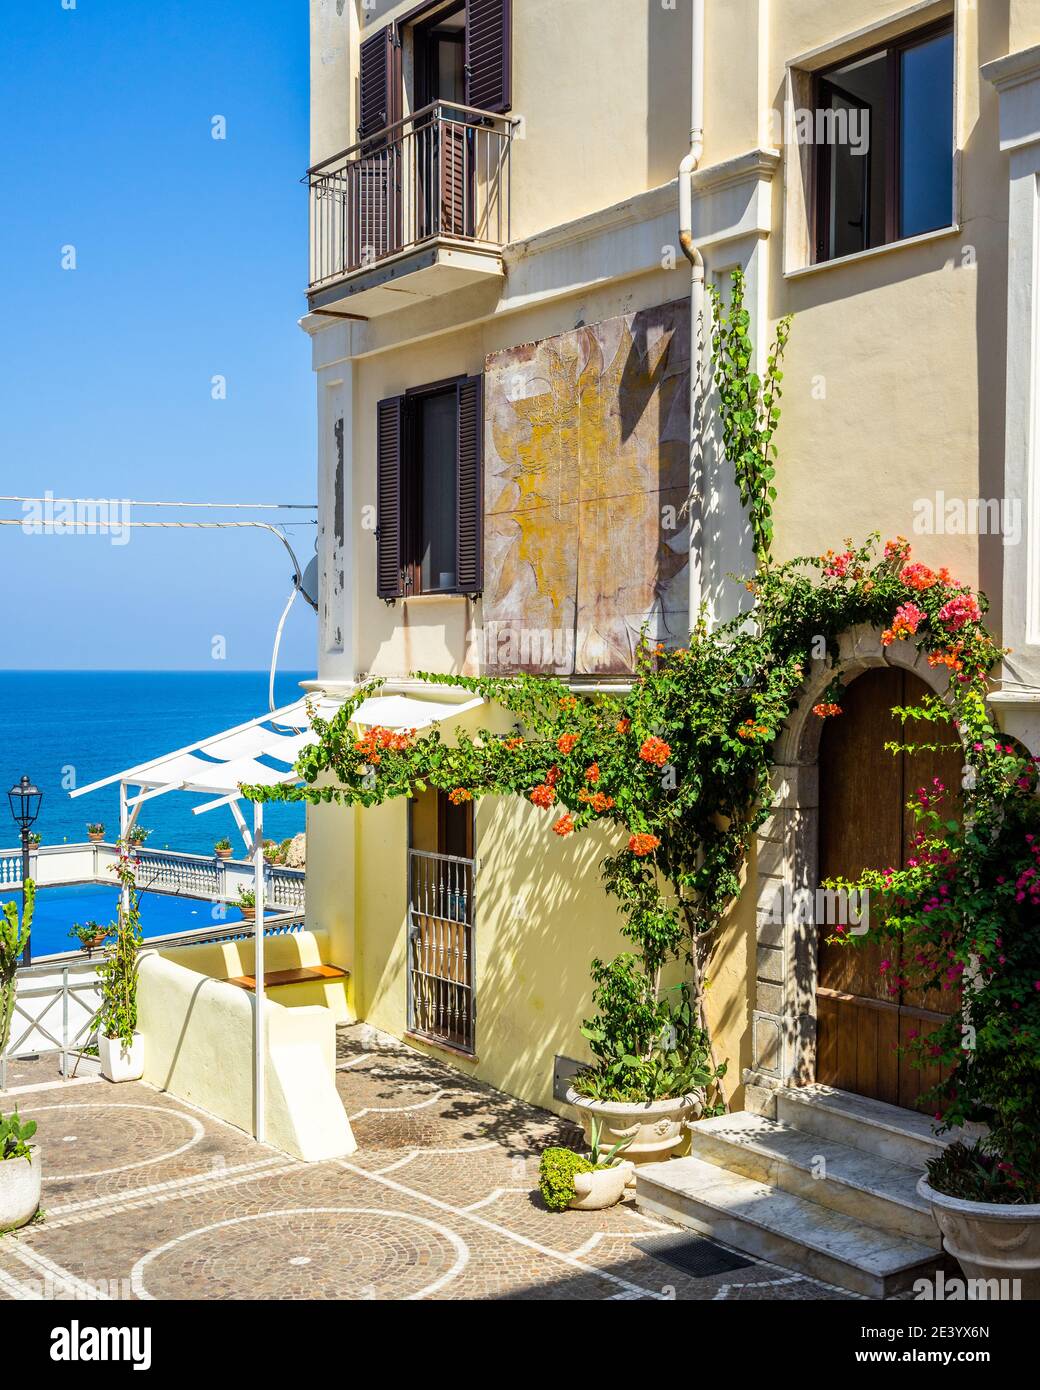 A picturesque house on the sea in Diamante, a famous resort town in Calabria region, southern Italy Stock Photo